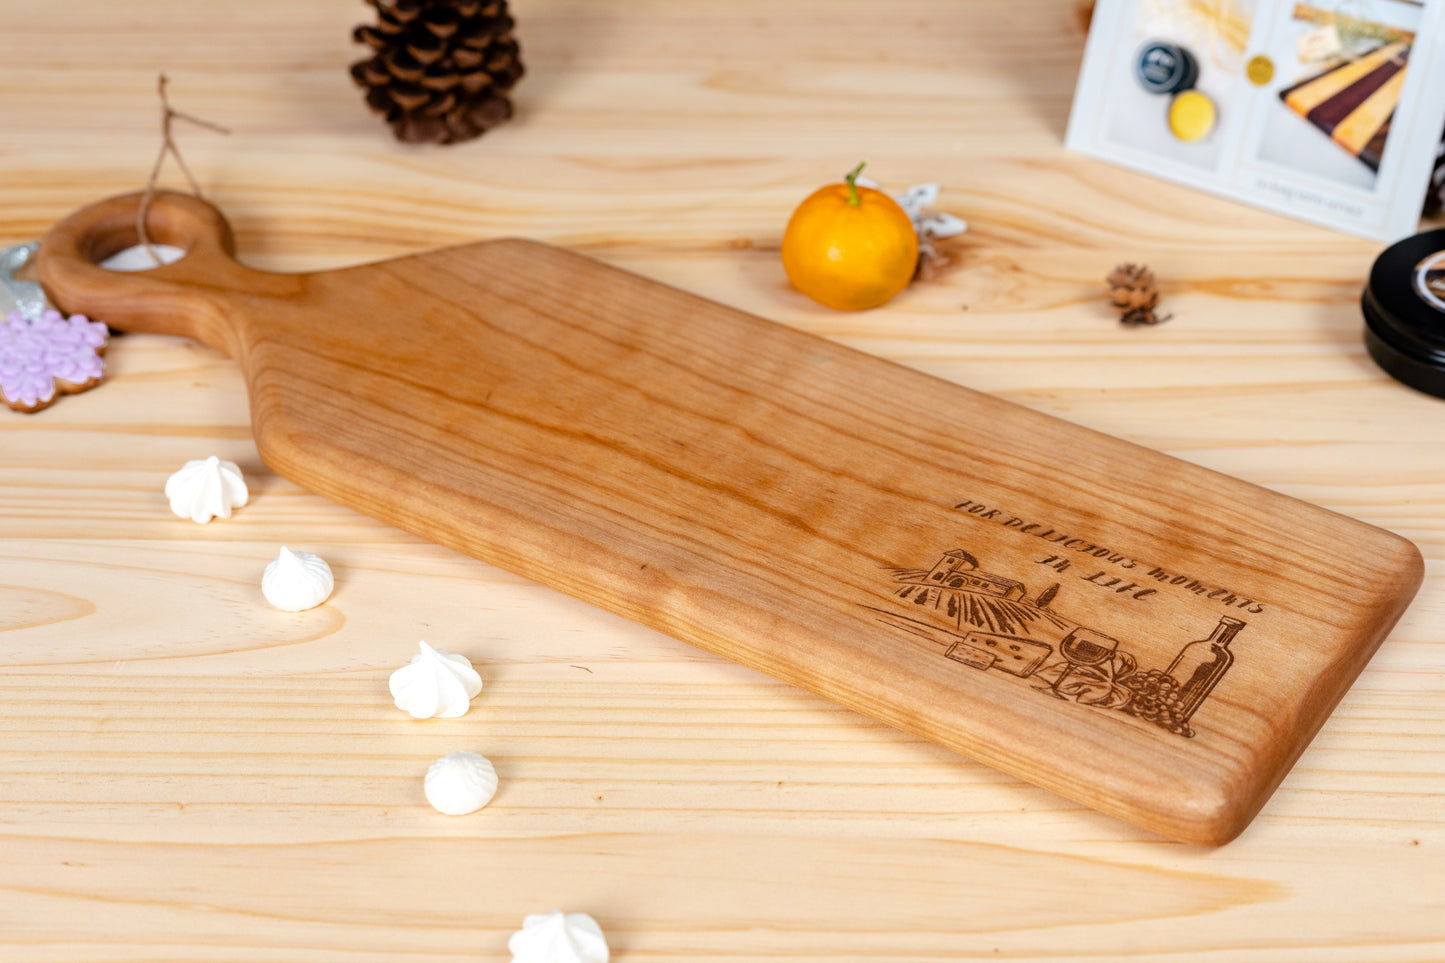 Birch Charcuterie Board "For delicious moments in Life"